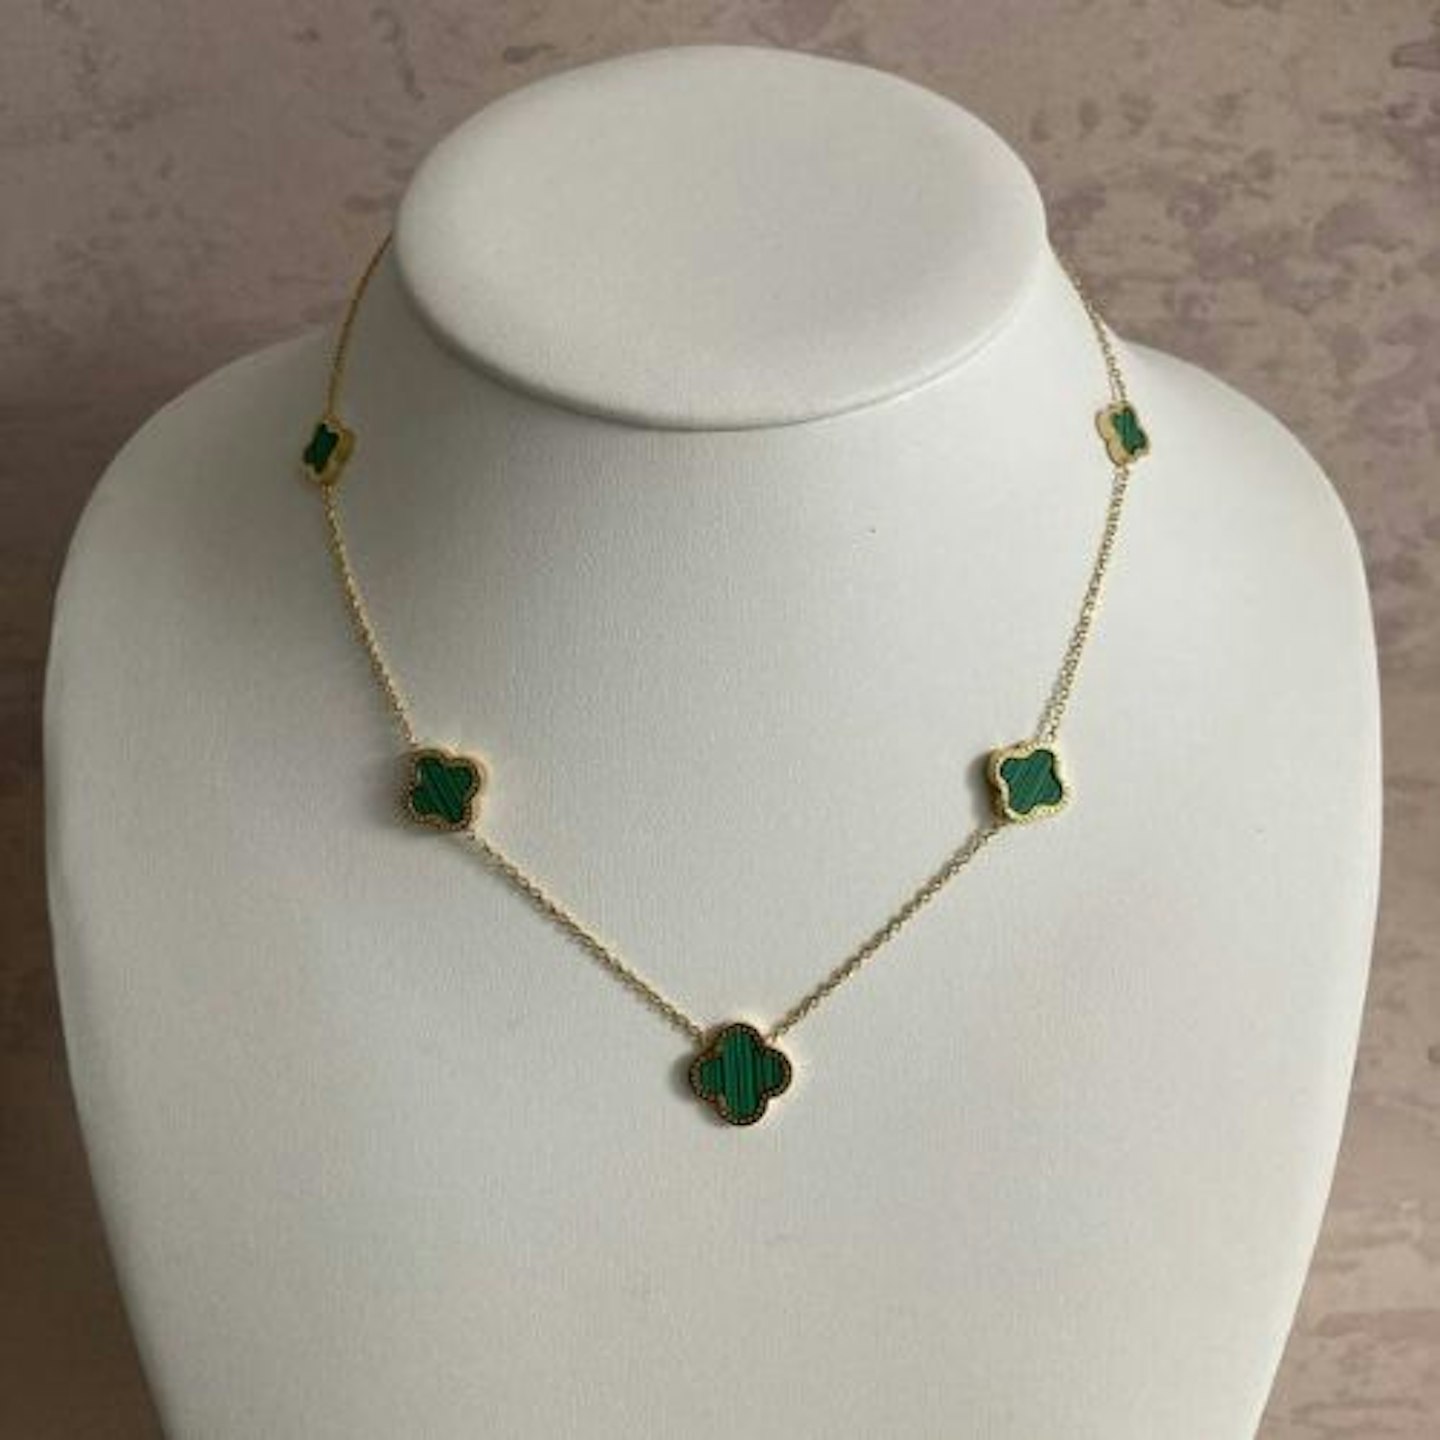 SR Collection Gold Plated Four Leaf Clover Necklace Emerald